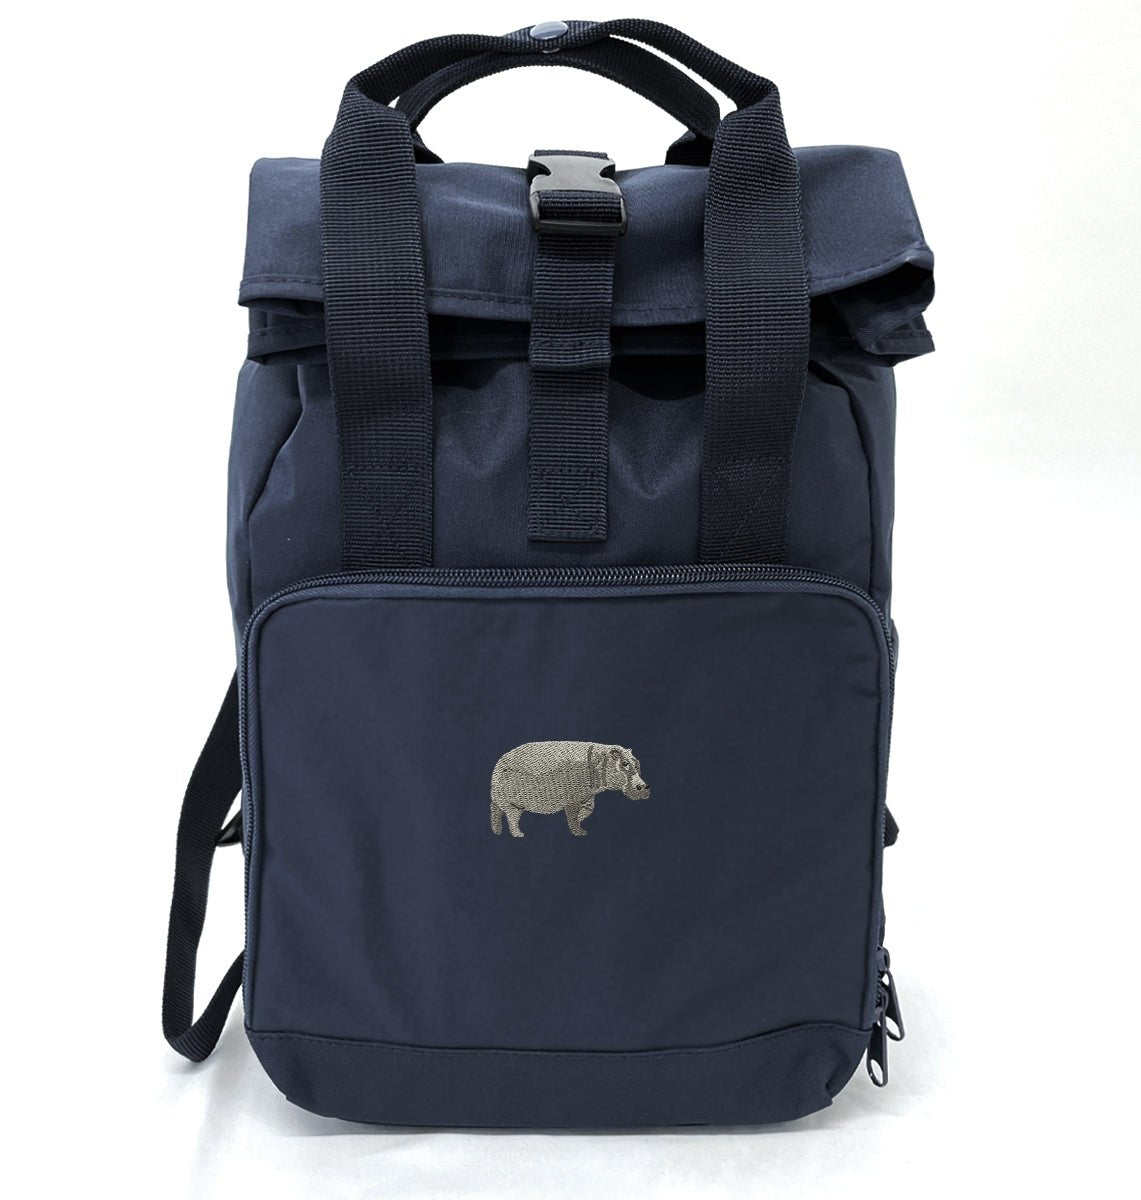 Hippo Mini Roll-top Recycled Backpack - Blue Panda